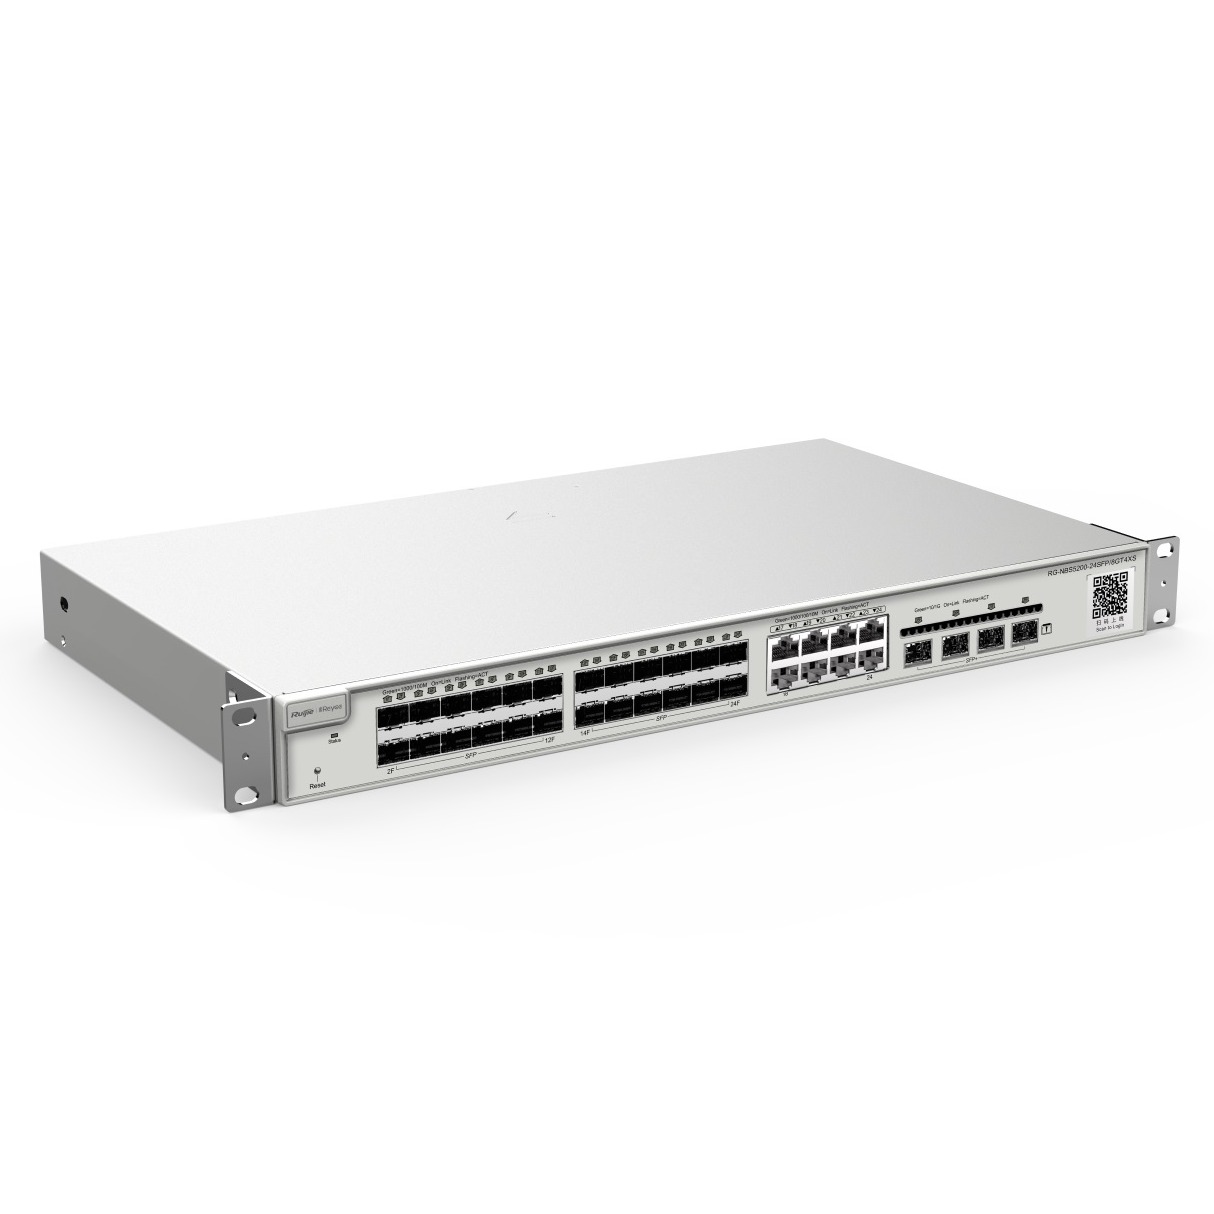 Reyee RG-NBS5200-24SFP/8GT4XS, 24 Port Giga SFP port with 8 Combo ports with 4 SFP+ uplink, Layer 3, Cloud Managed Switch